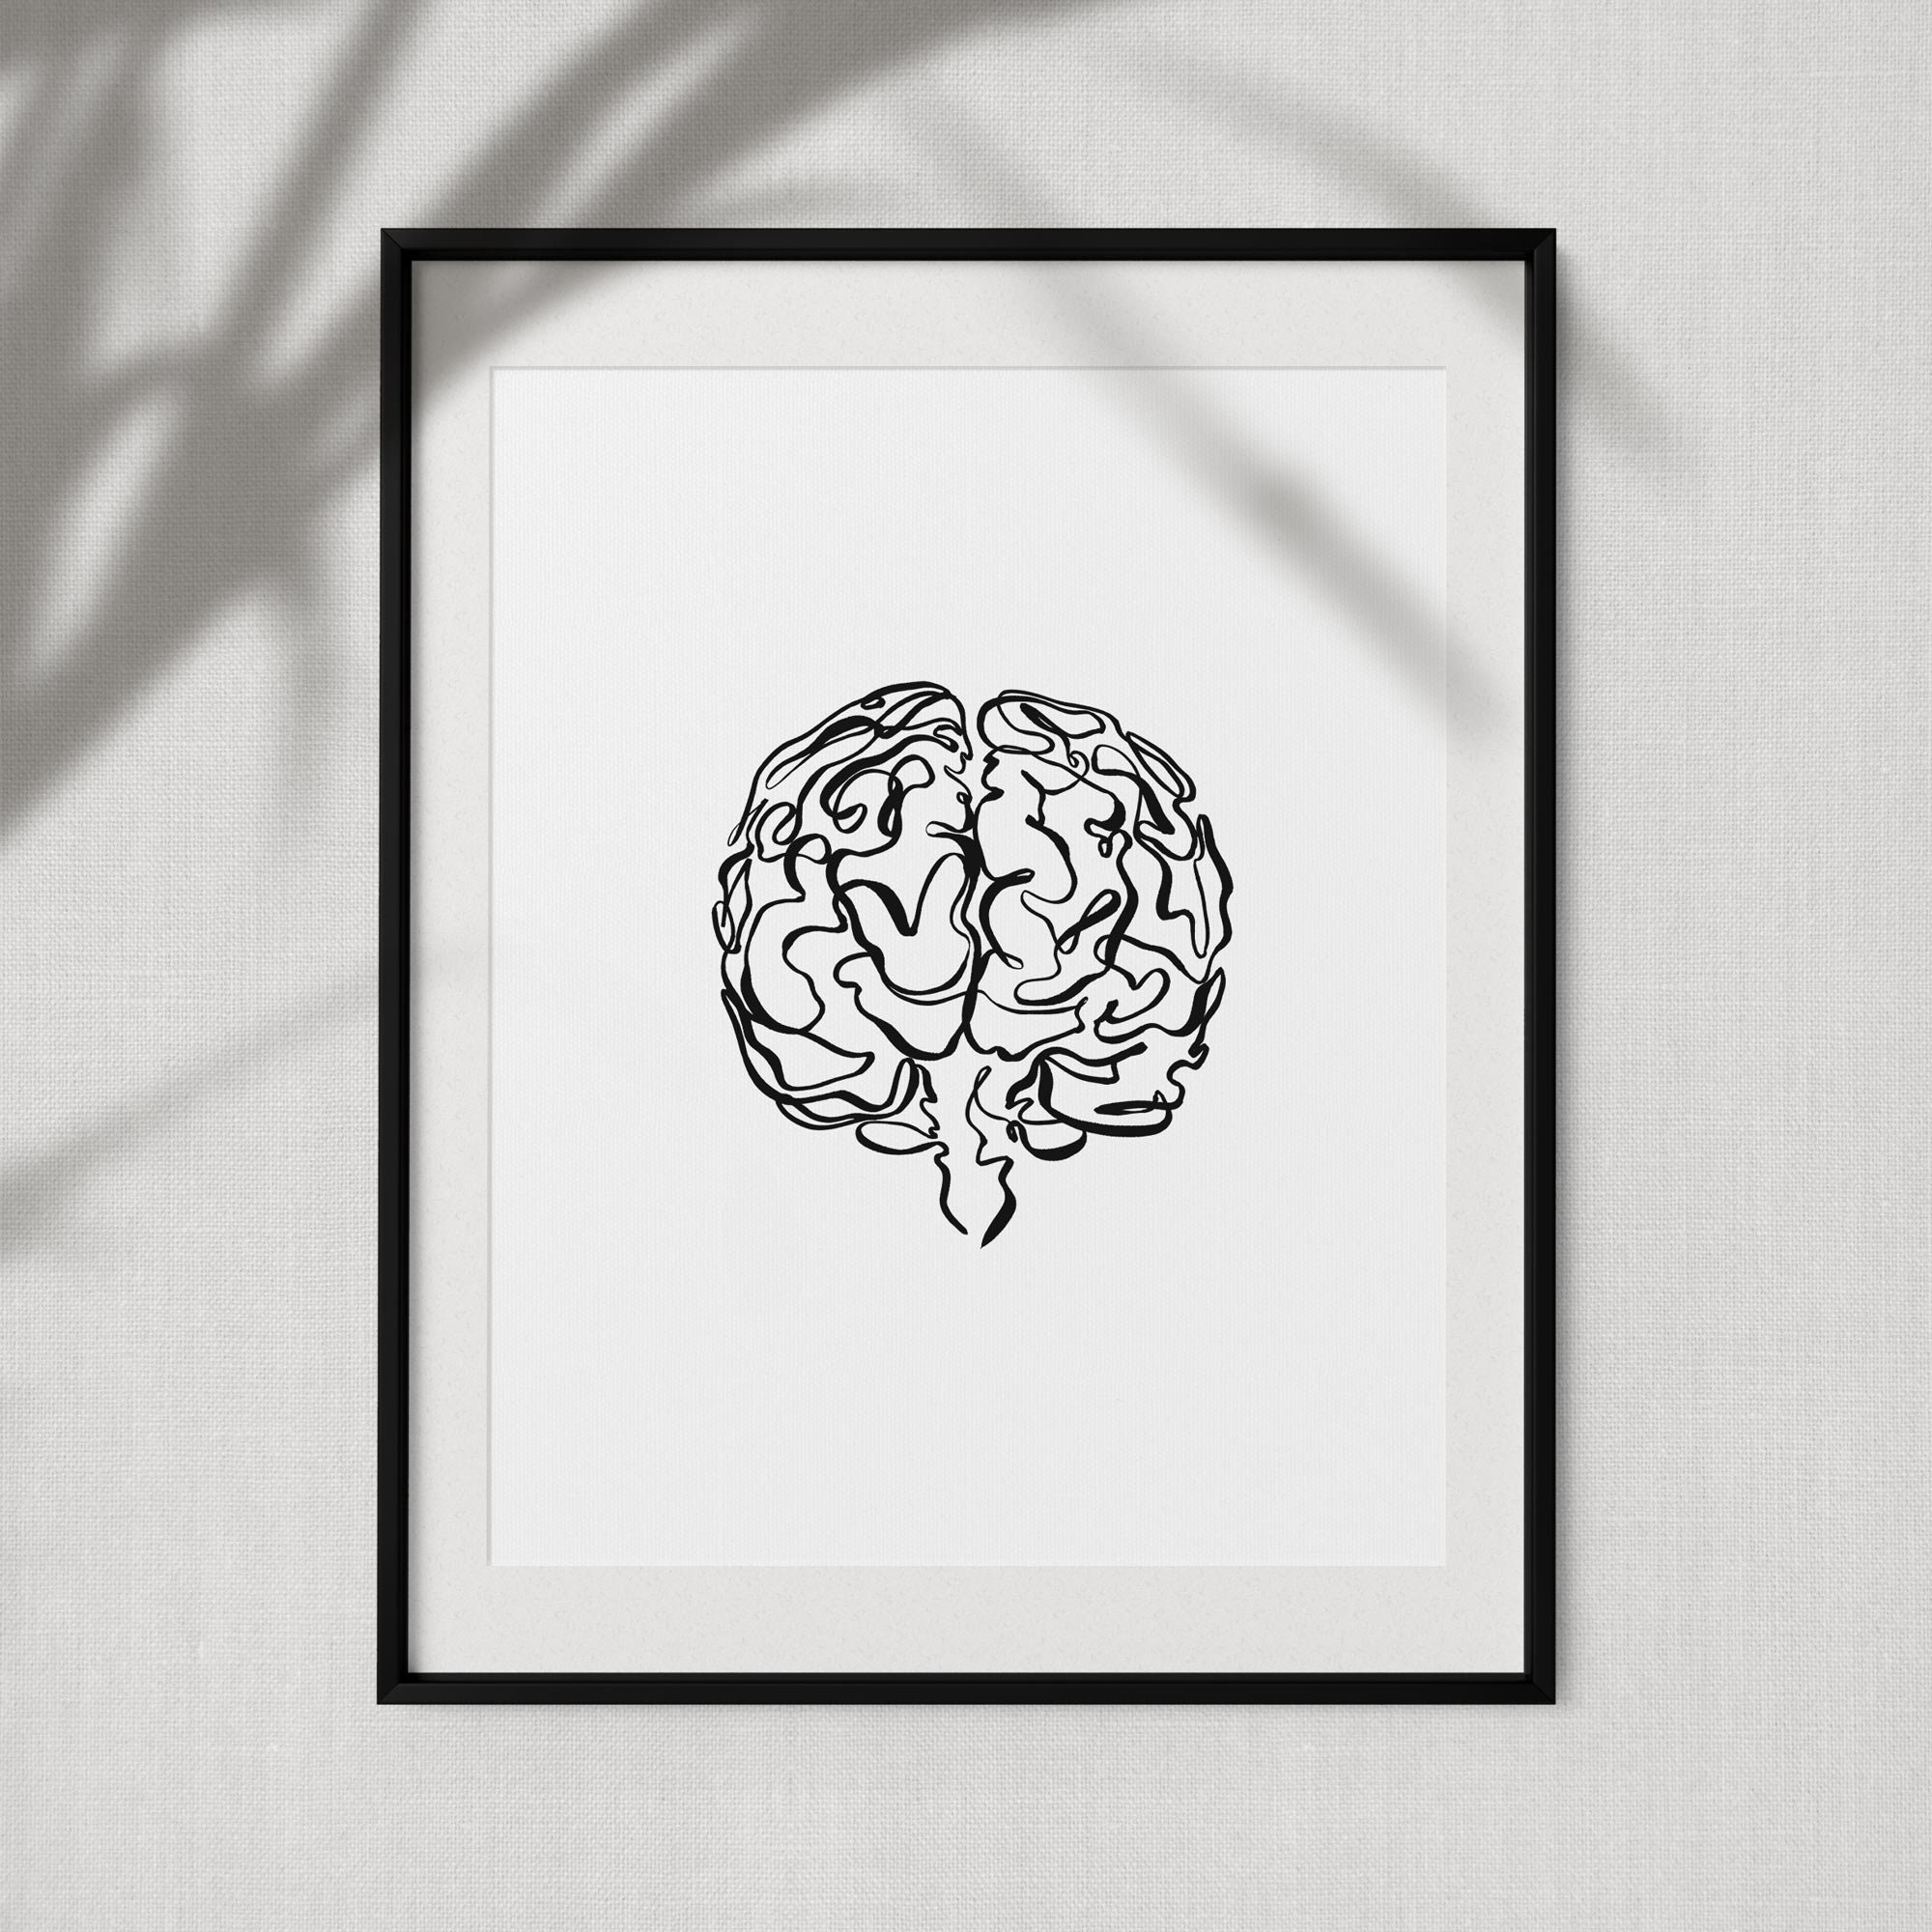 Details more than 63 brain picture drawing best